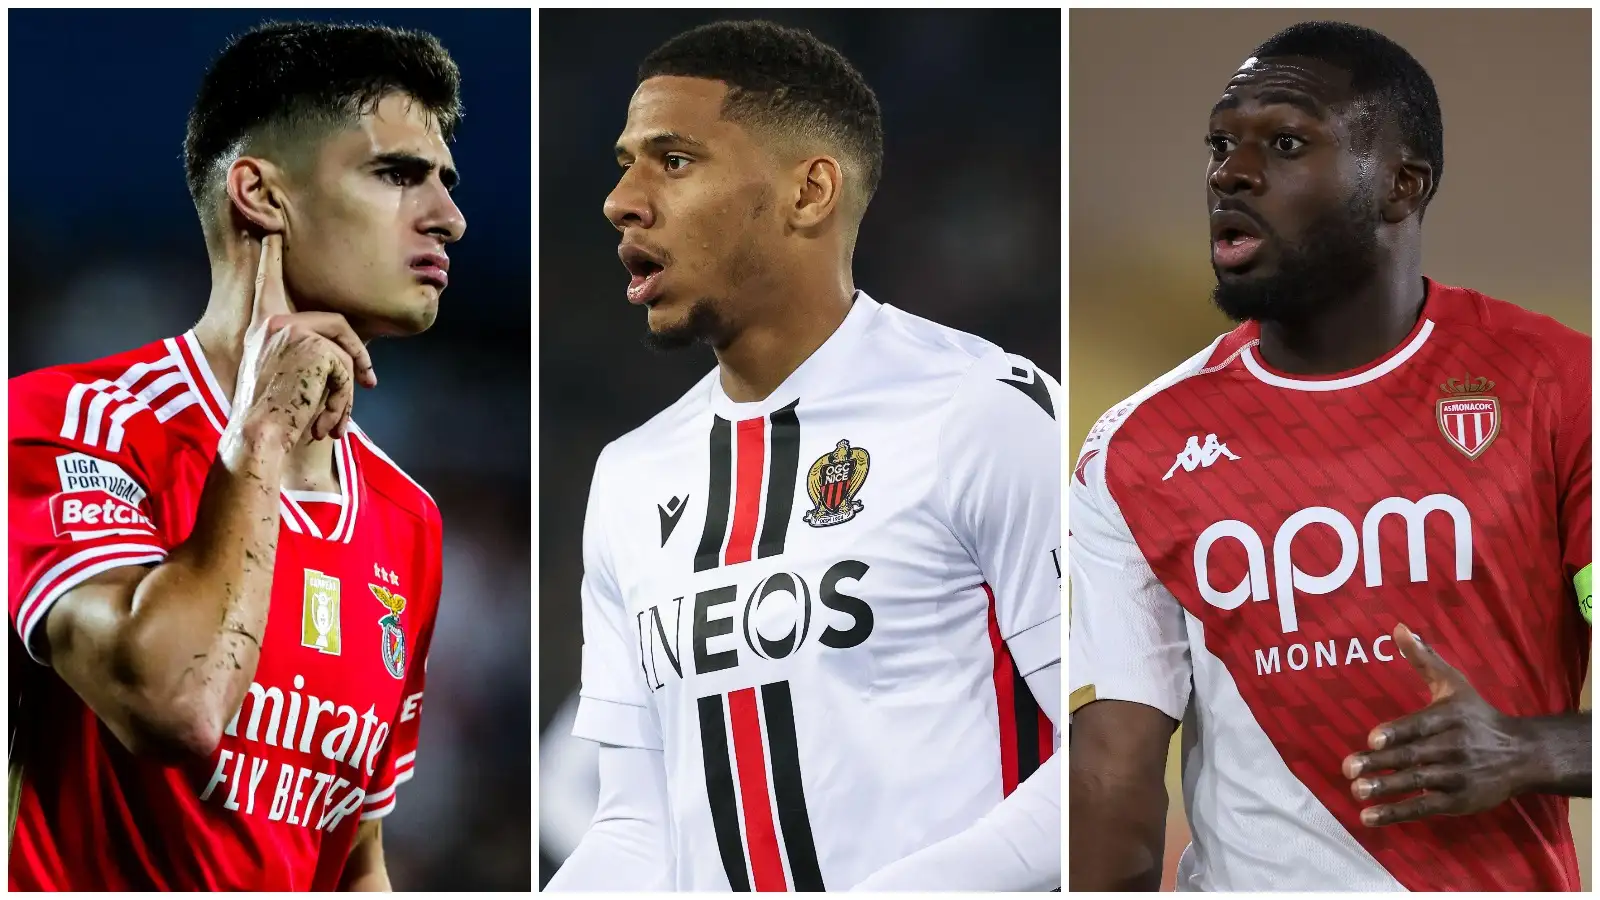 Antonio Silva, Jean-Clair Todibo and Youssouf Fofana are all being watched by Man Utd.